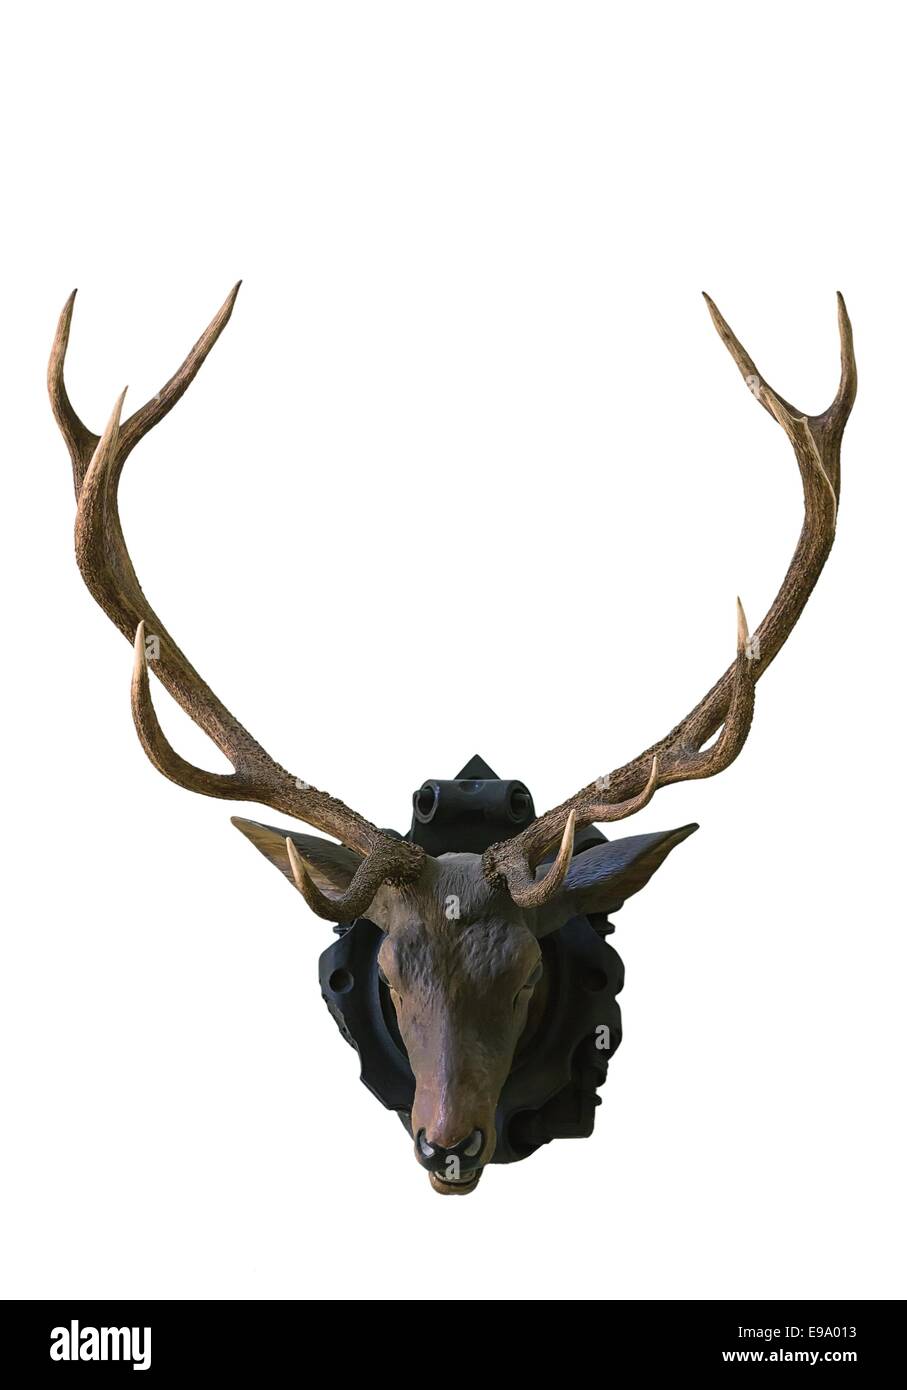 Deer head isolated on white background Stock Photo